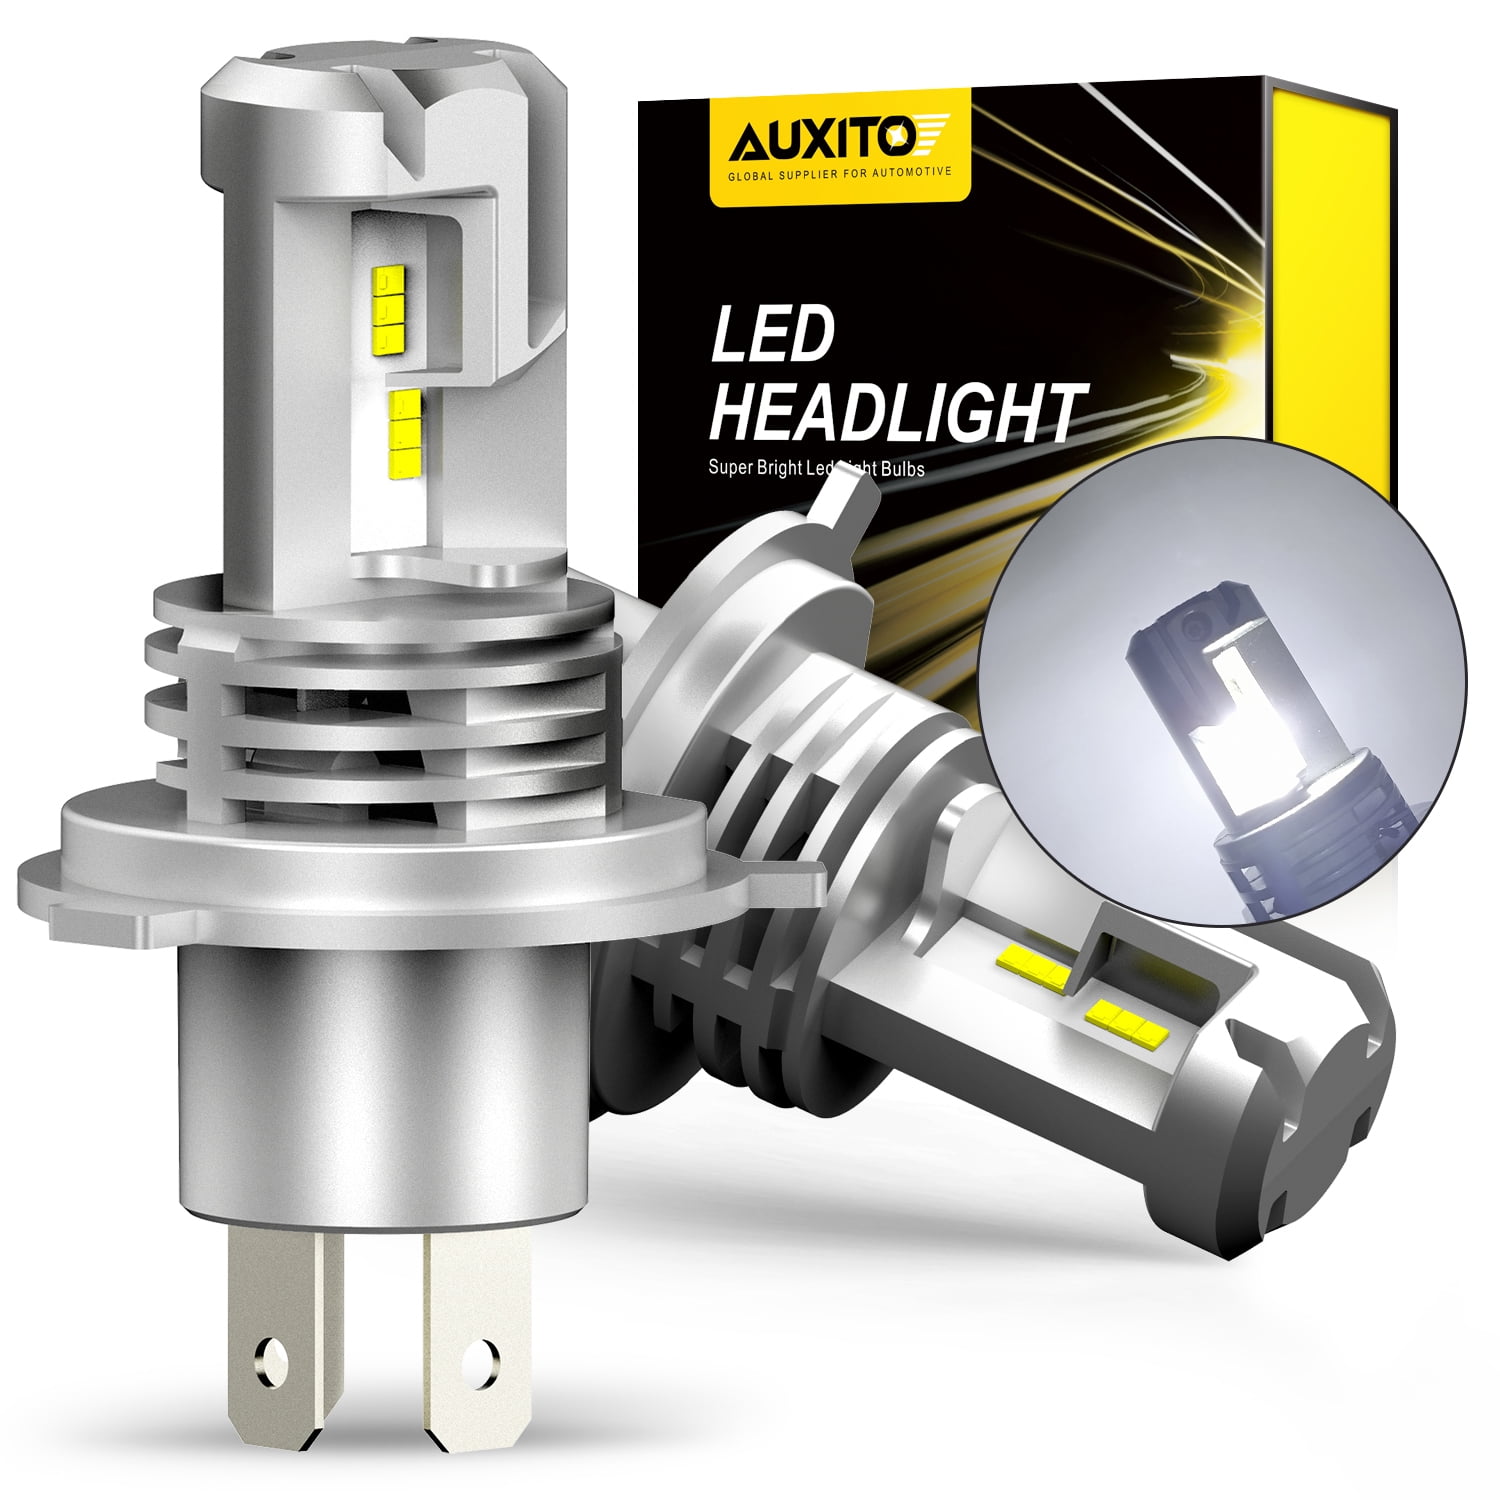 AUXITO H4 9003 HB2 LED Headlight Bulbs, 12000LM Per Set 6500K Xenon White for High and Low Beam Hi/Lo, Pack of 2 - image 1 of 9